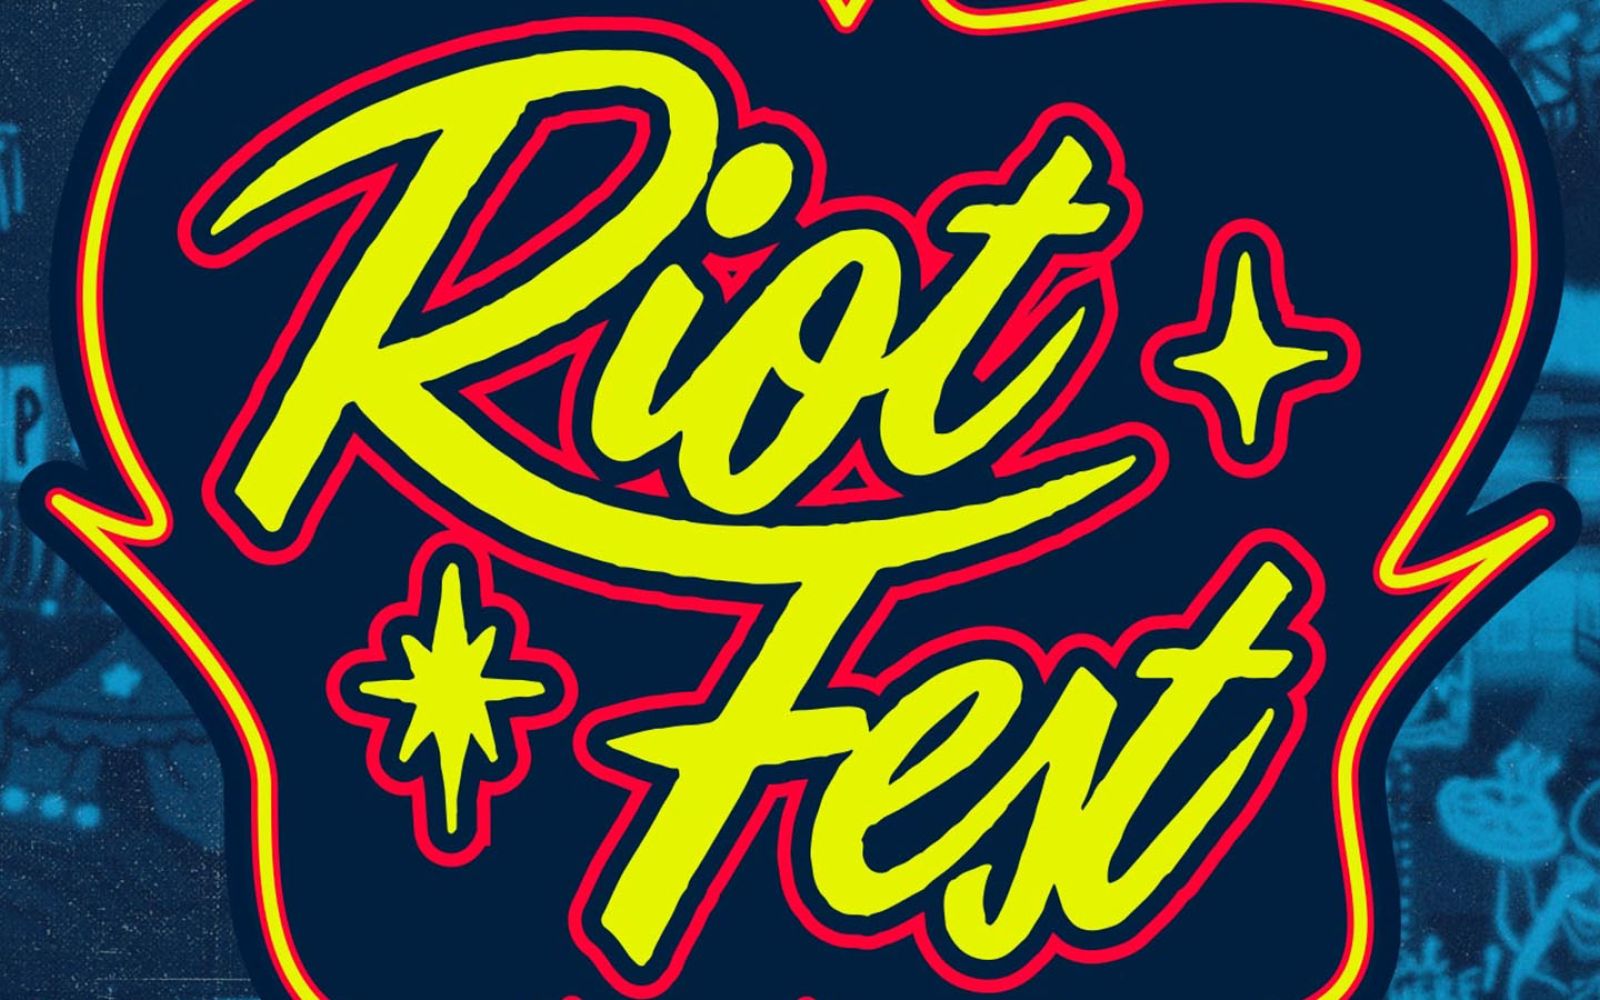 Riot Fest will be in Chicago from Sept. 20-22.